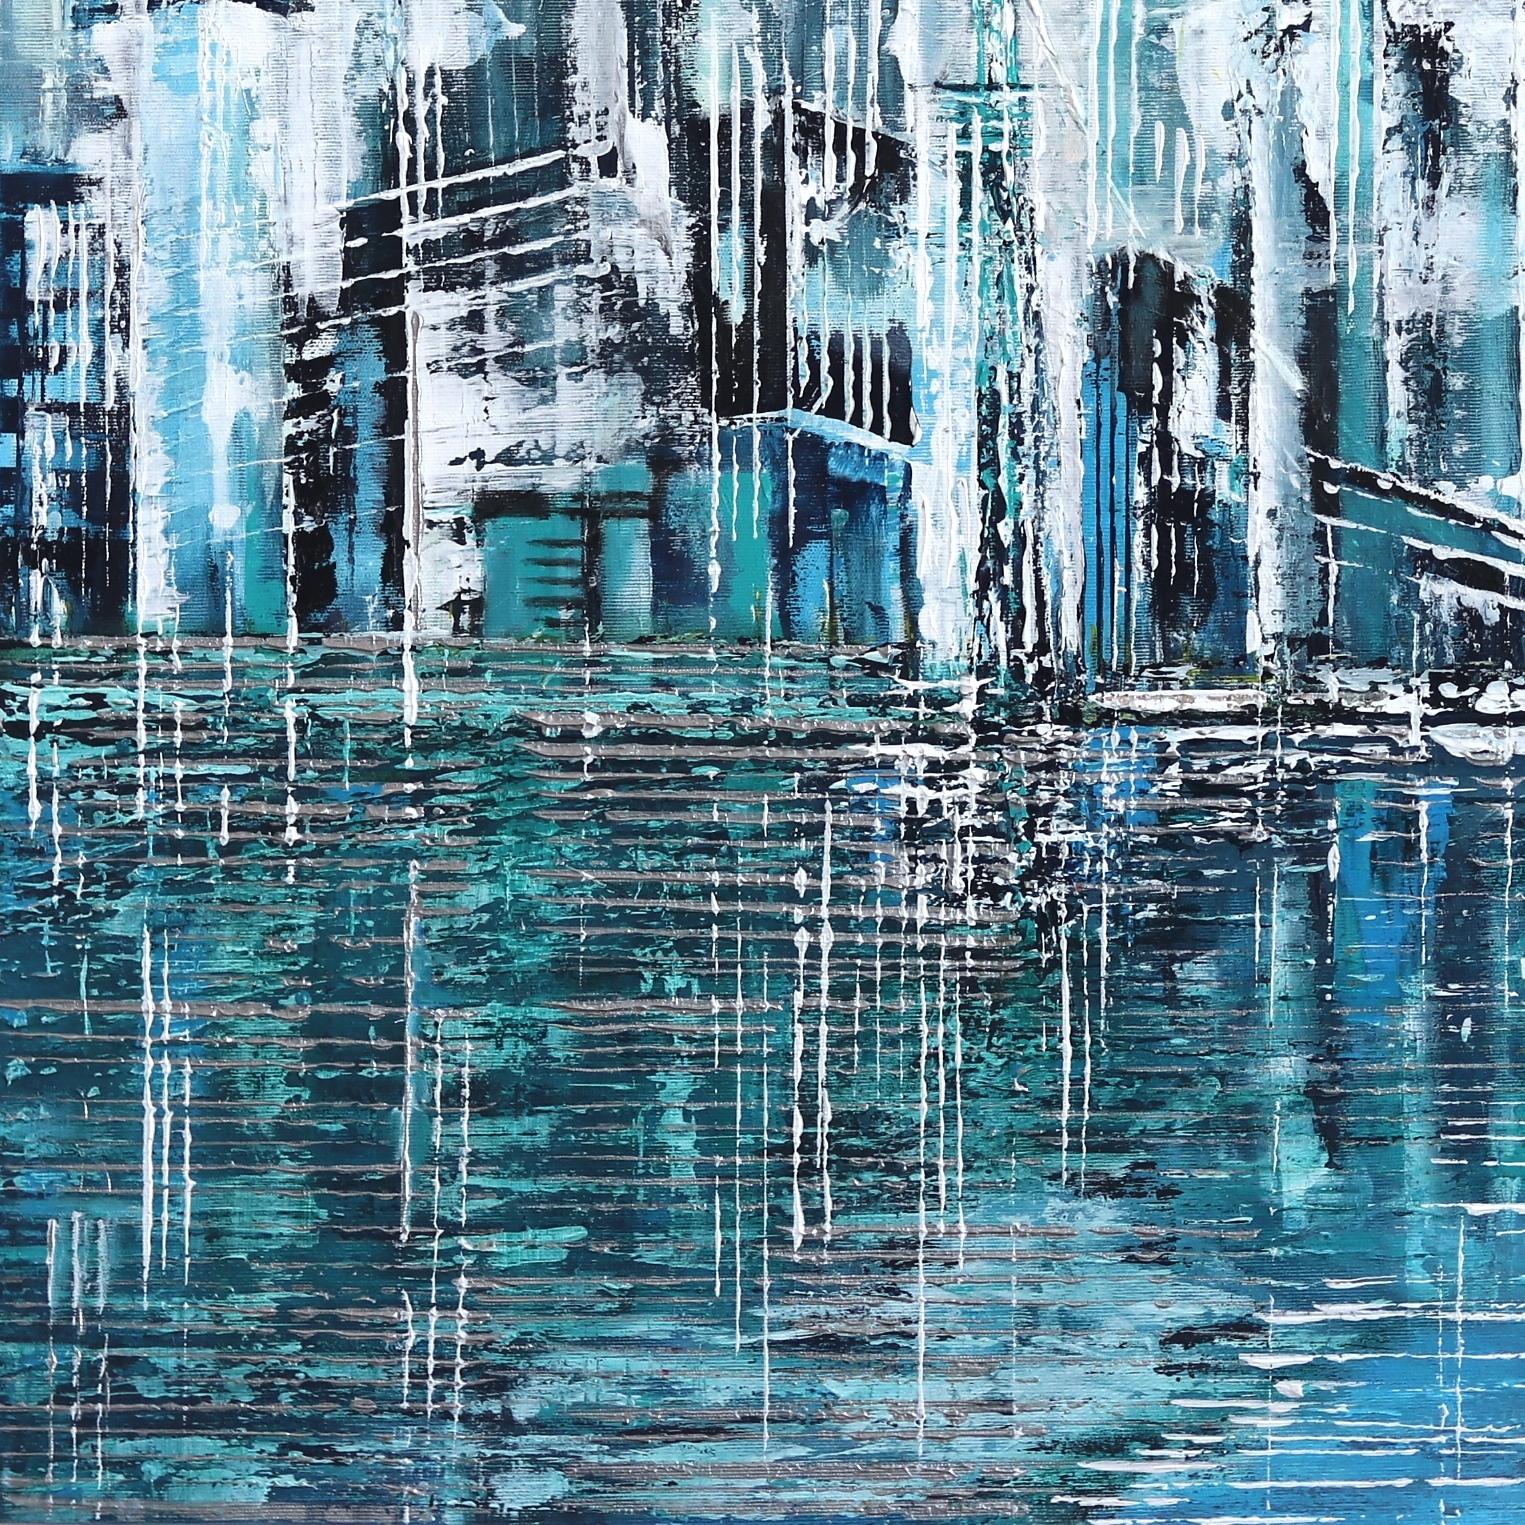 Water Lines - Blue Abstract Painting by Ivana Milosevic